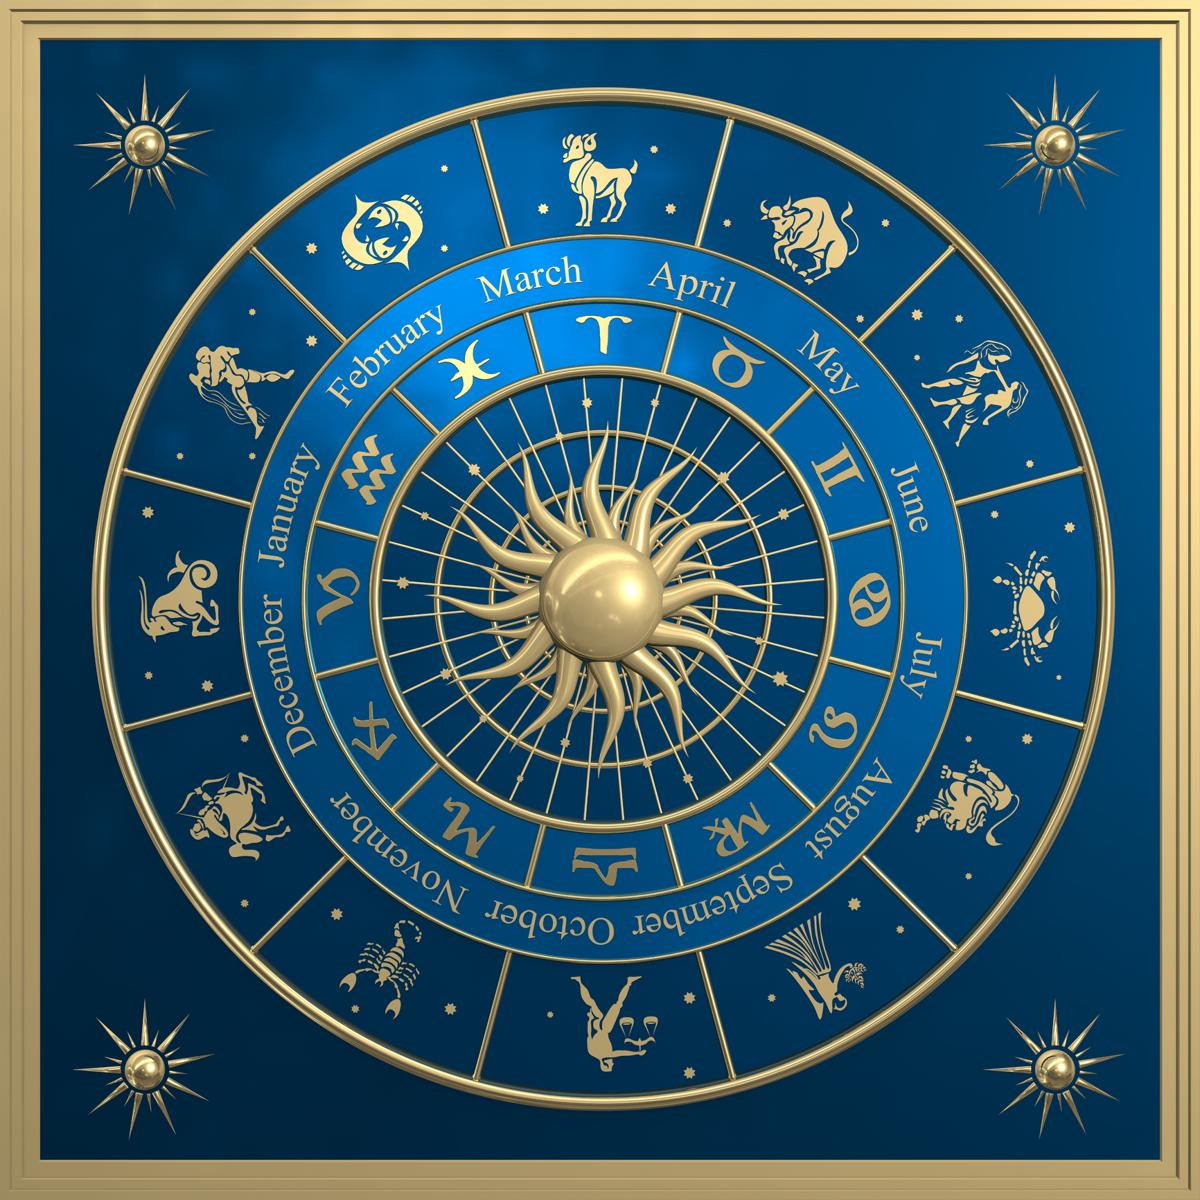 Remarkably Accurate Interpretation and Meaning of Celtic Zodiac Signs